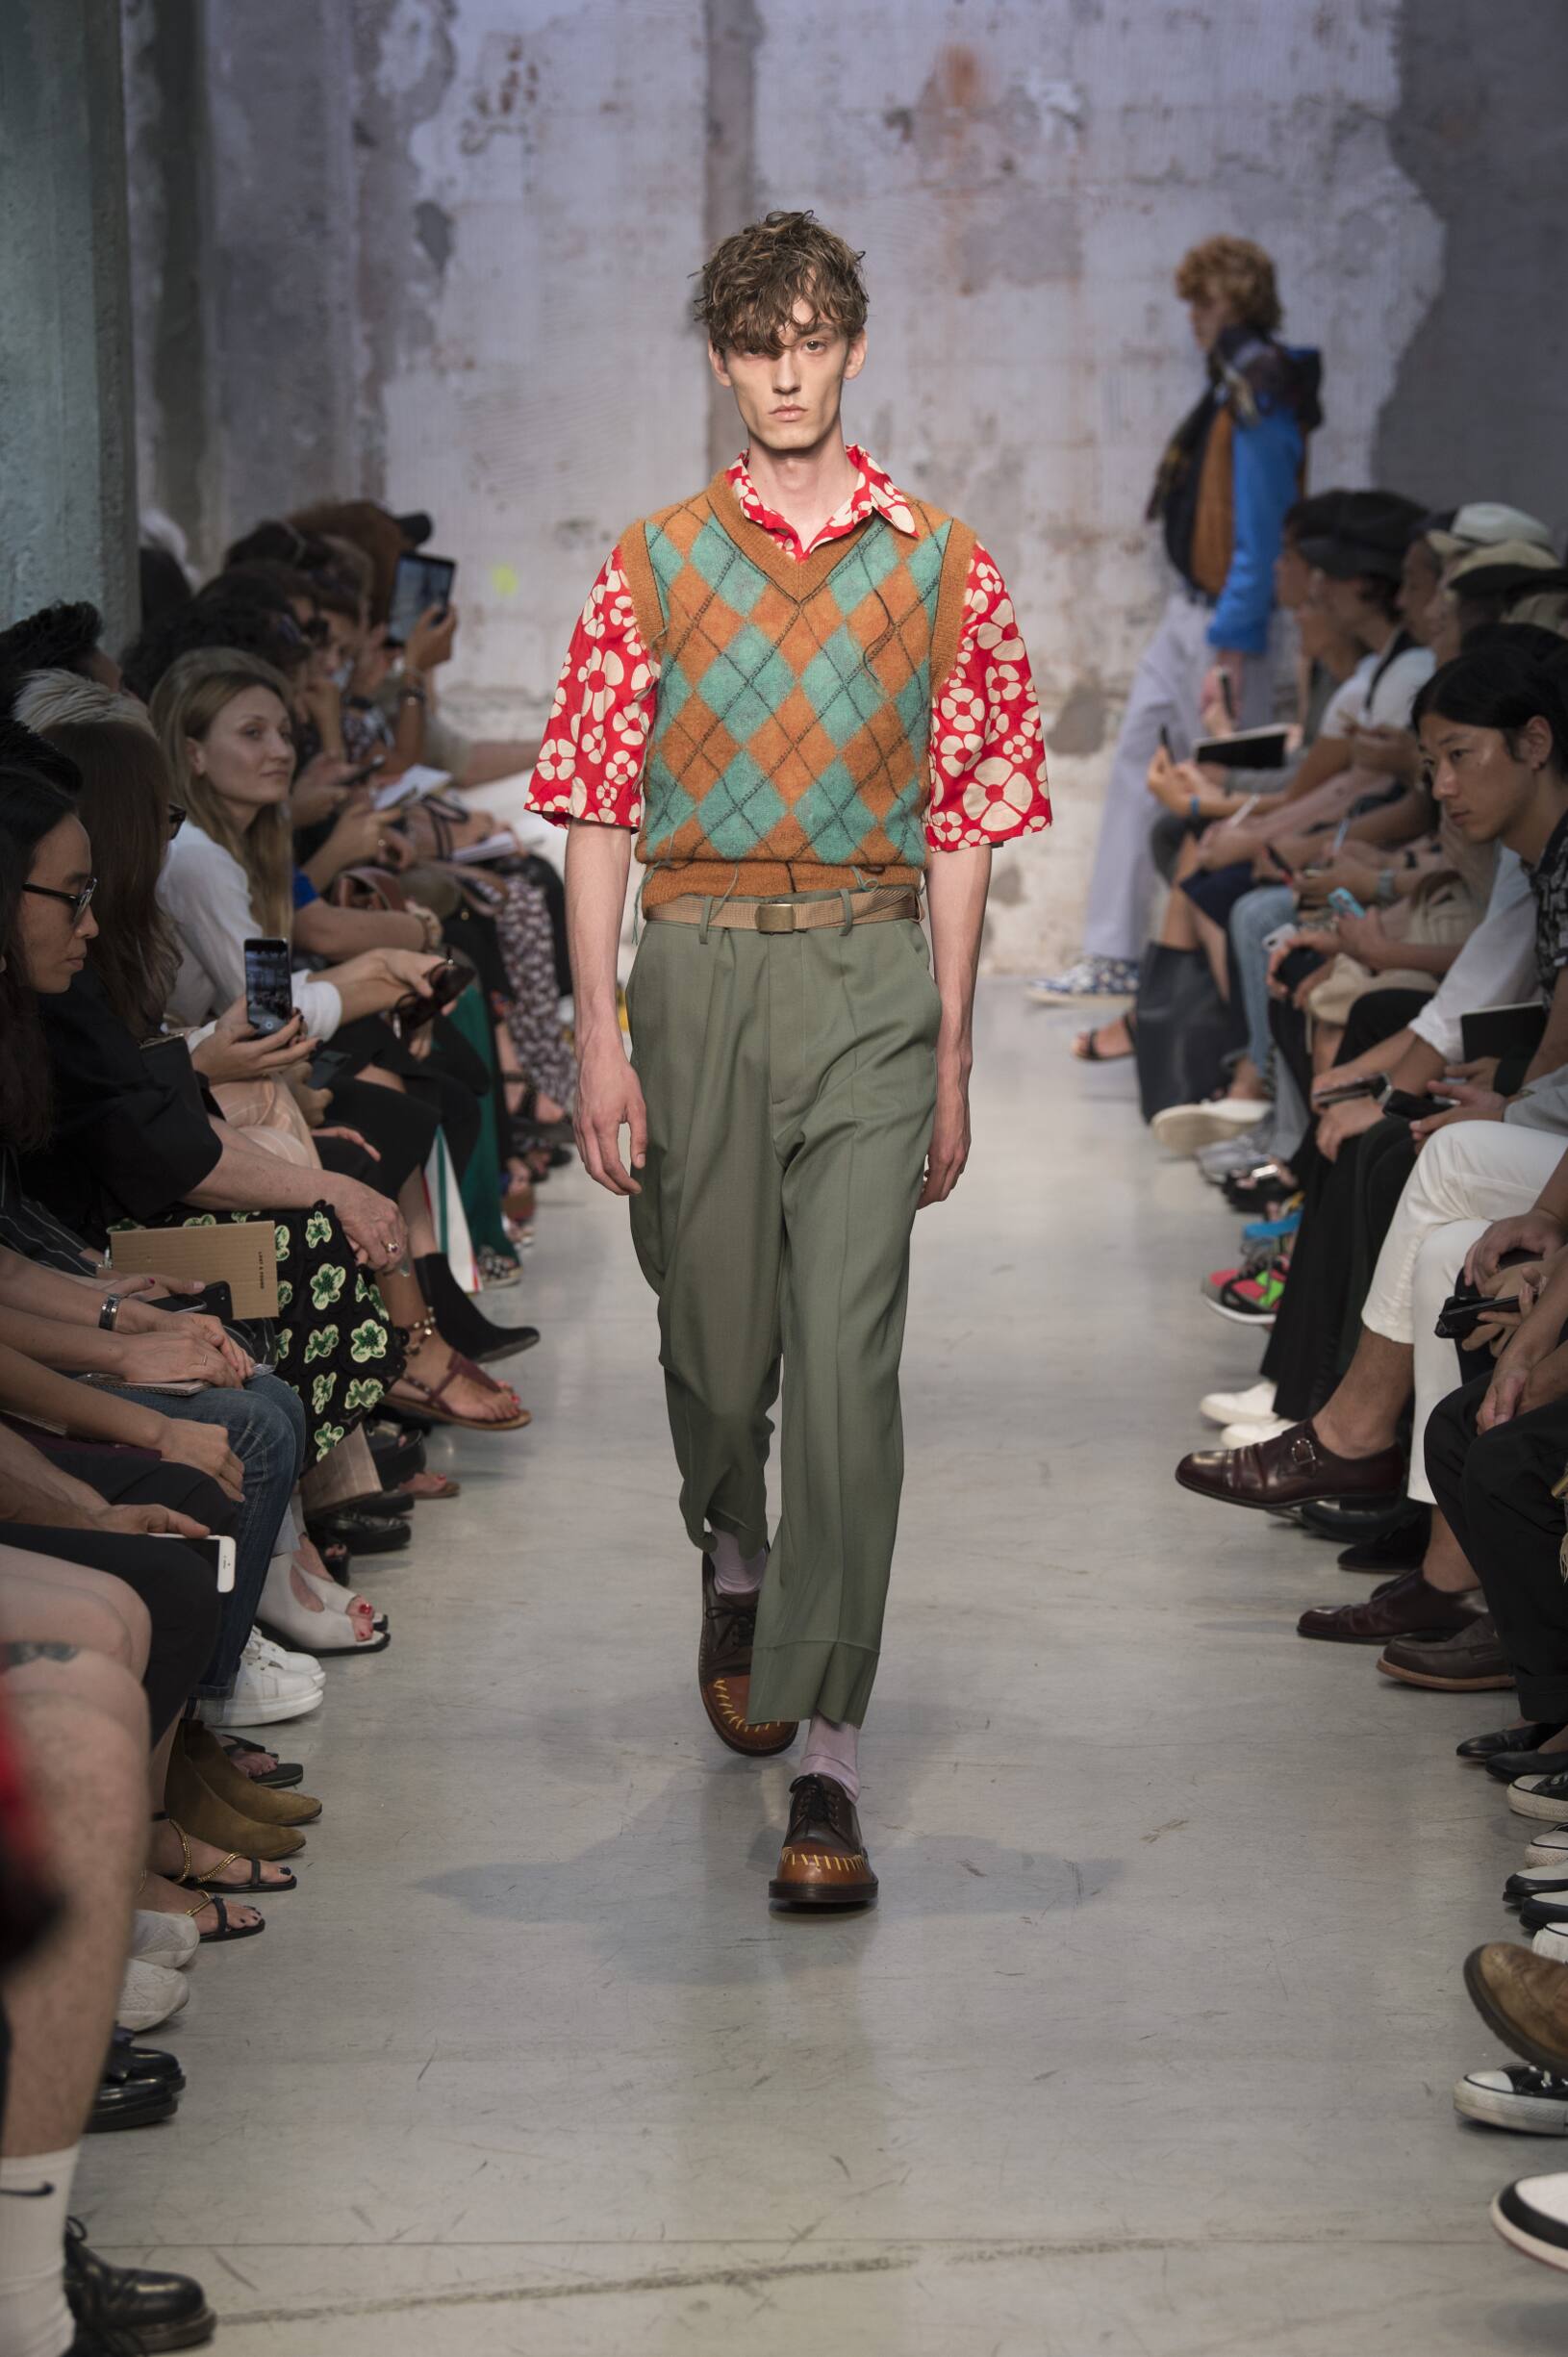 MARNI SPRING SUMMER 2018 MEN’S COLLECTION | The Skinny Beep